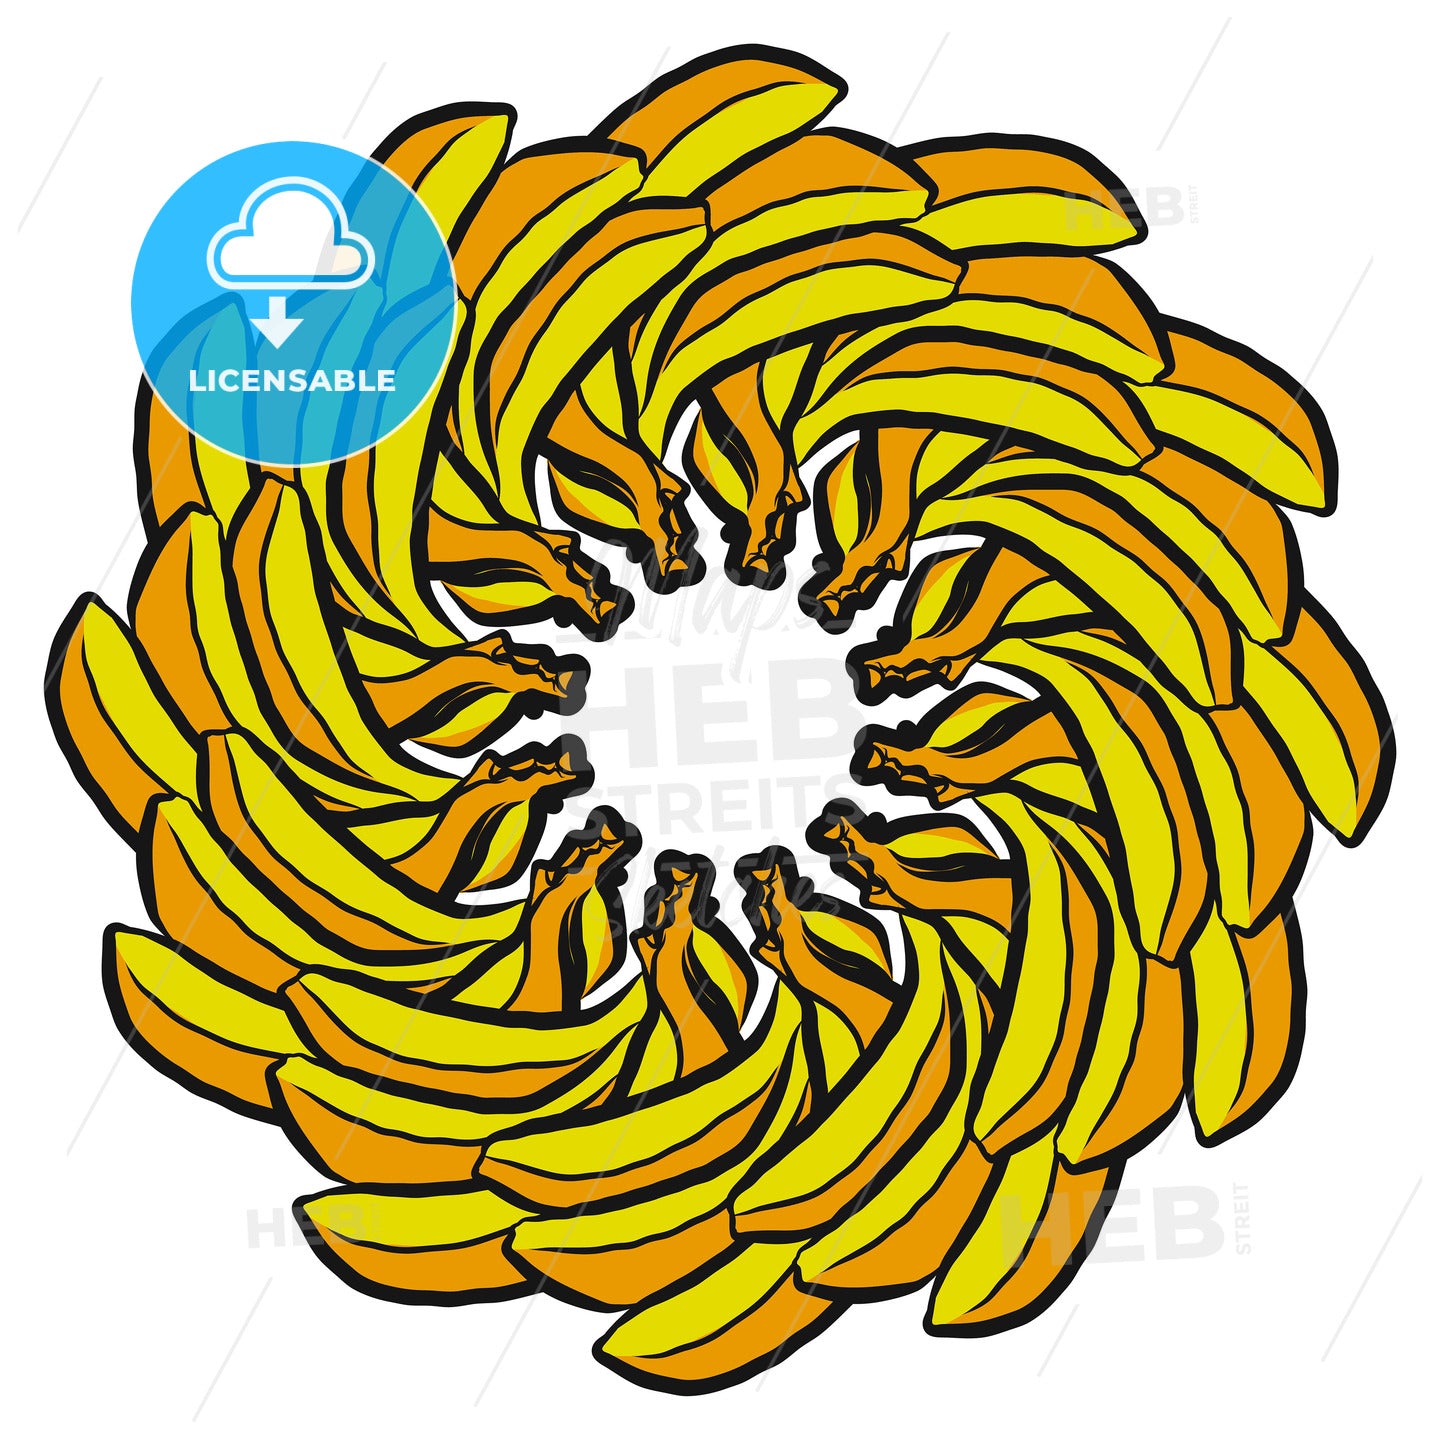 Many bananas arranged in a circle on white – instant download